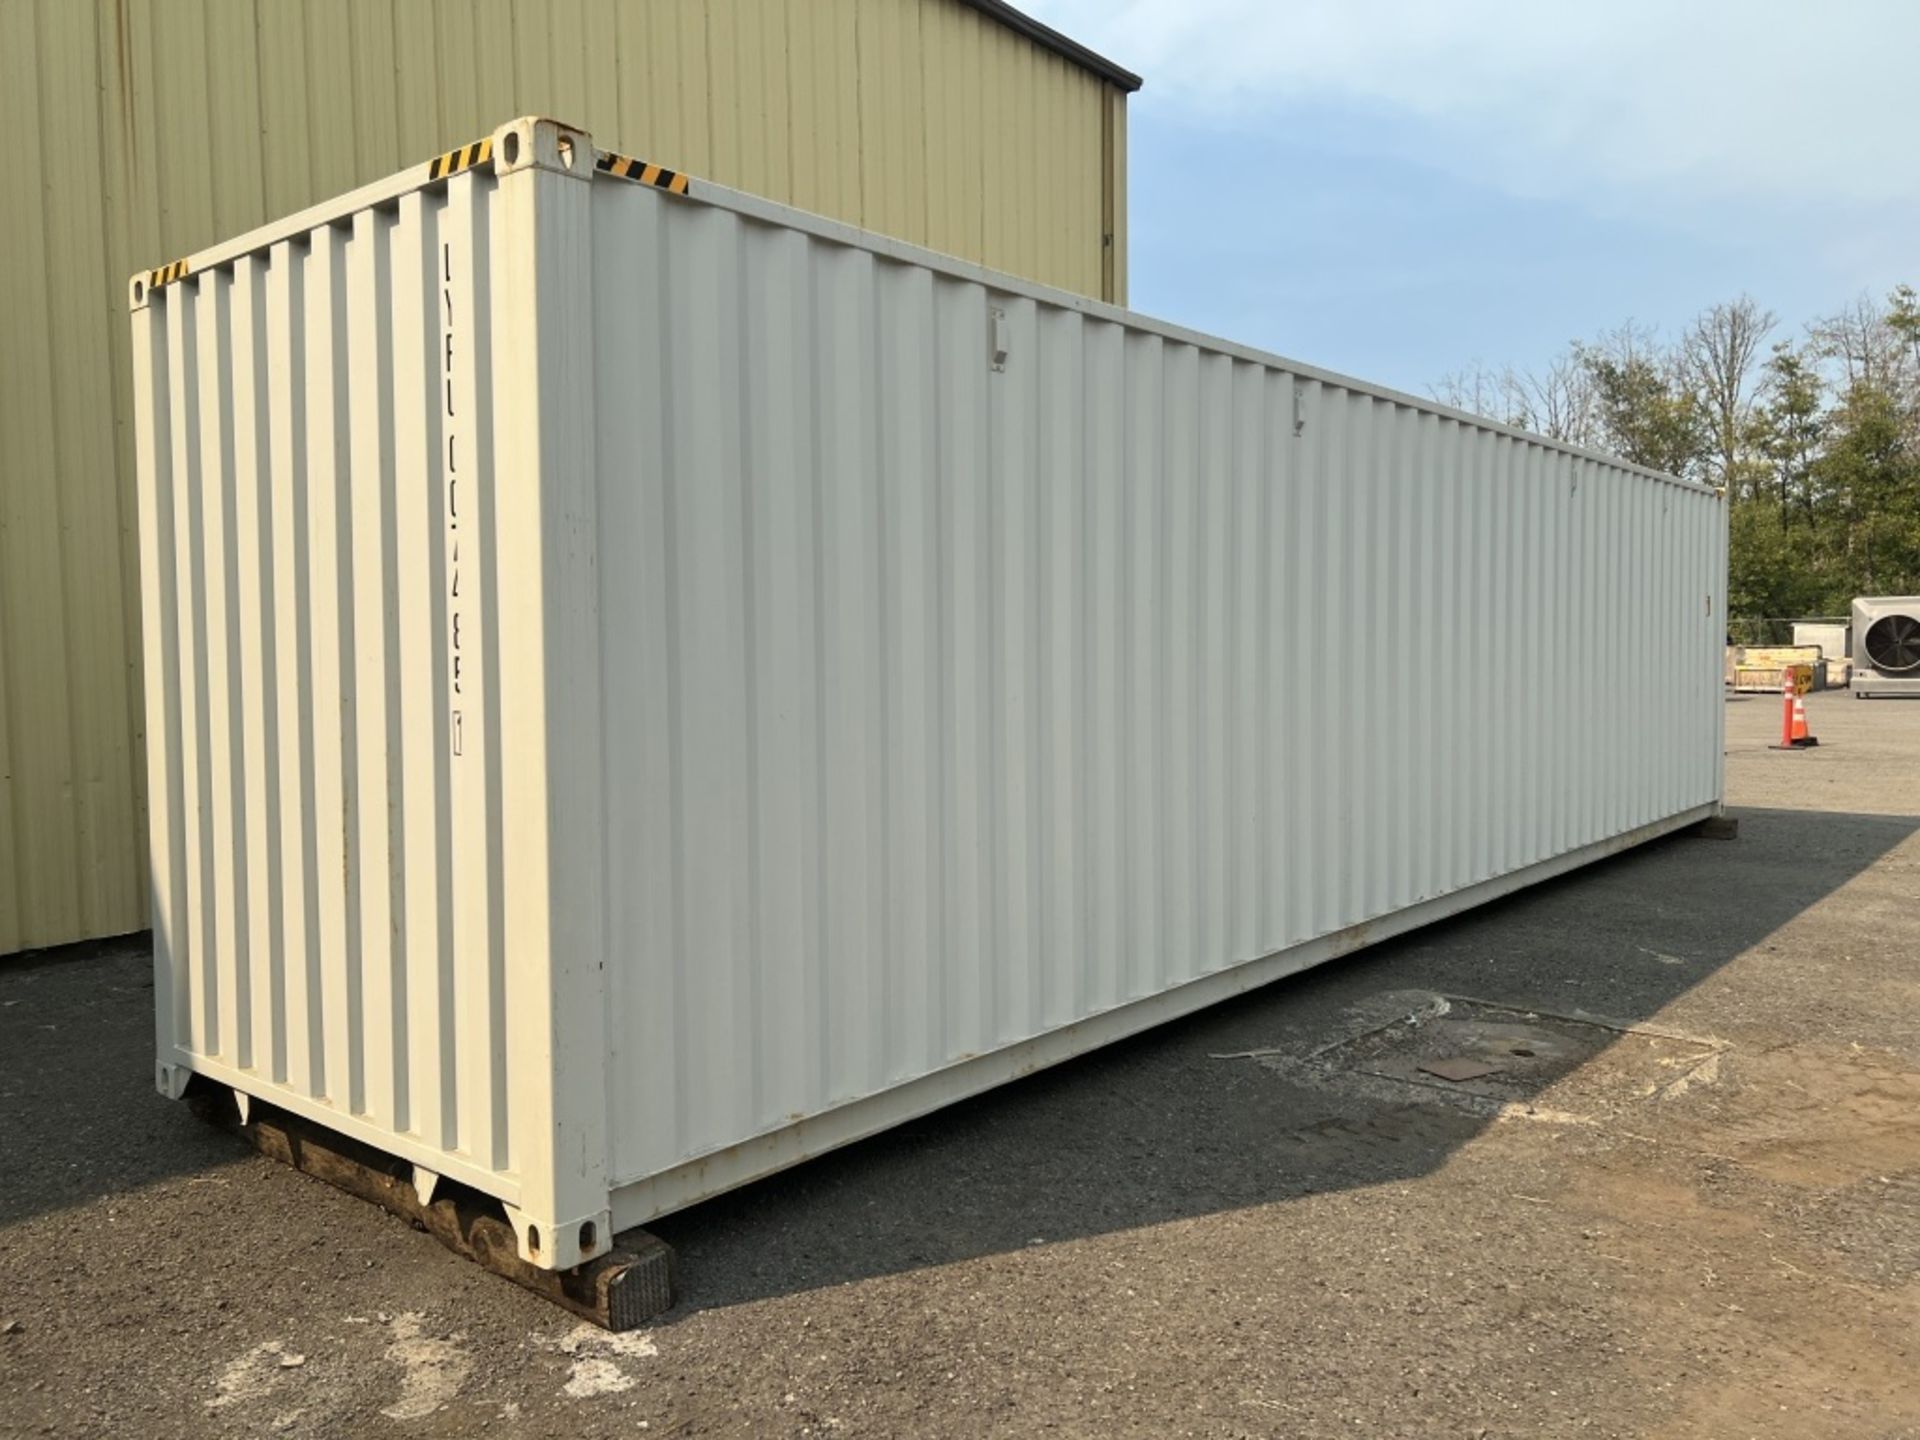 2022 40' High Cube Shipping Container - Image 4 of 10